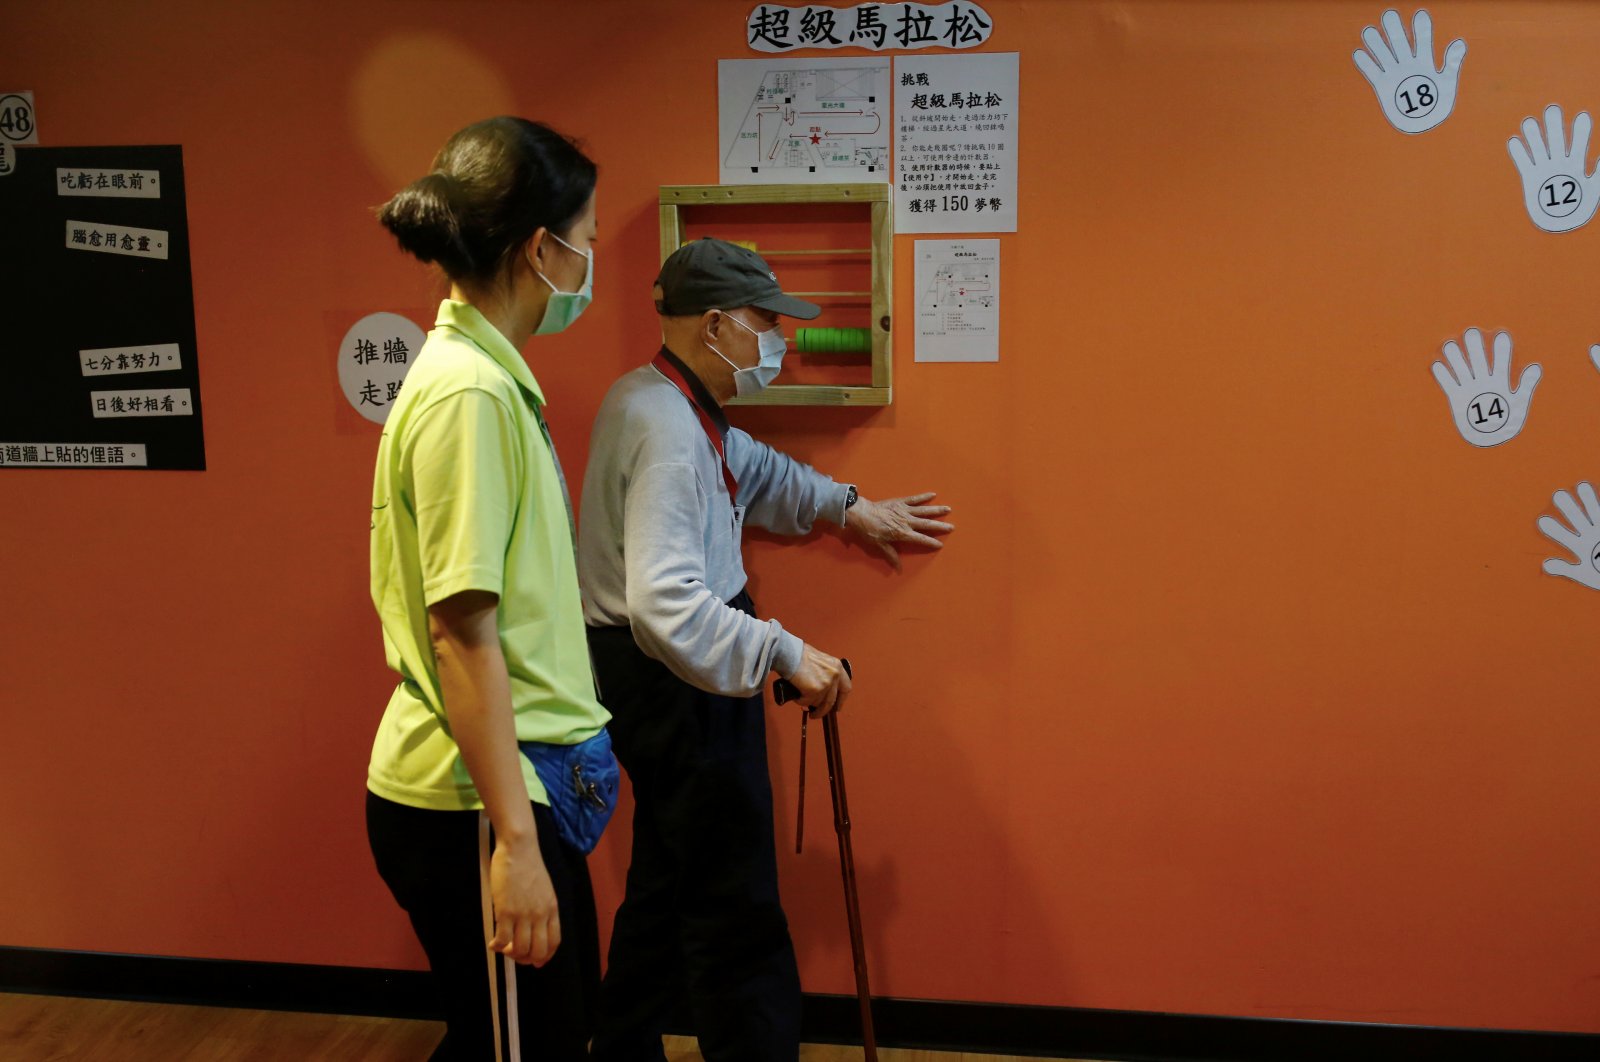 A senior wears a mask to protect himself from coronavirus disease (COVID-19) while walking along a wall at an elderly day care center in Taipei, Taiwan May 8, 2020. Picture taken May 8, 2020. (Reuters Photo)